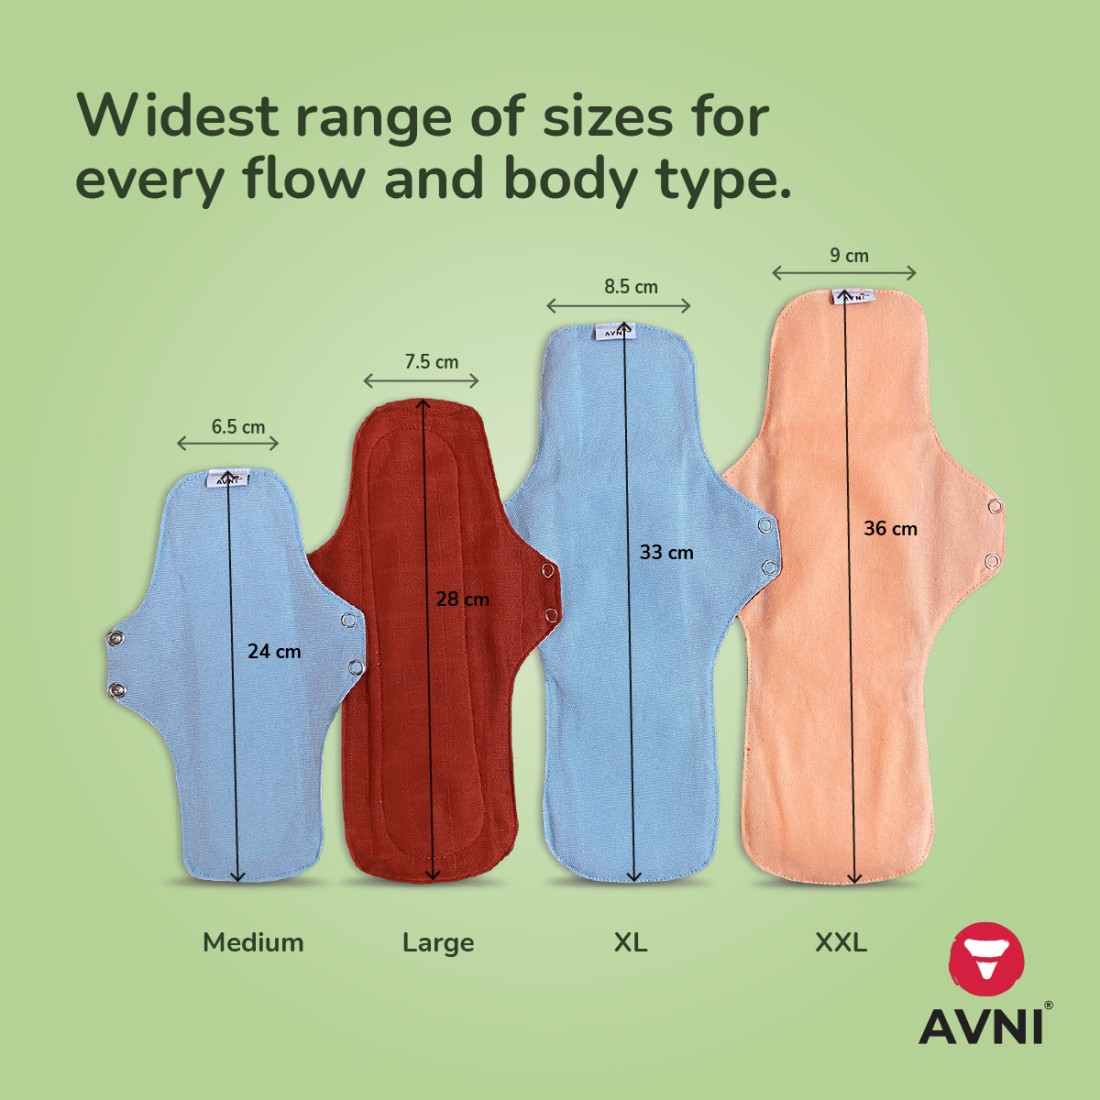 Avni Fluff Washable Cloth Panty Liner (S- 200MM X 4) + Period Wear